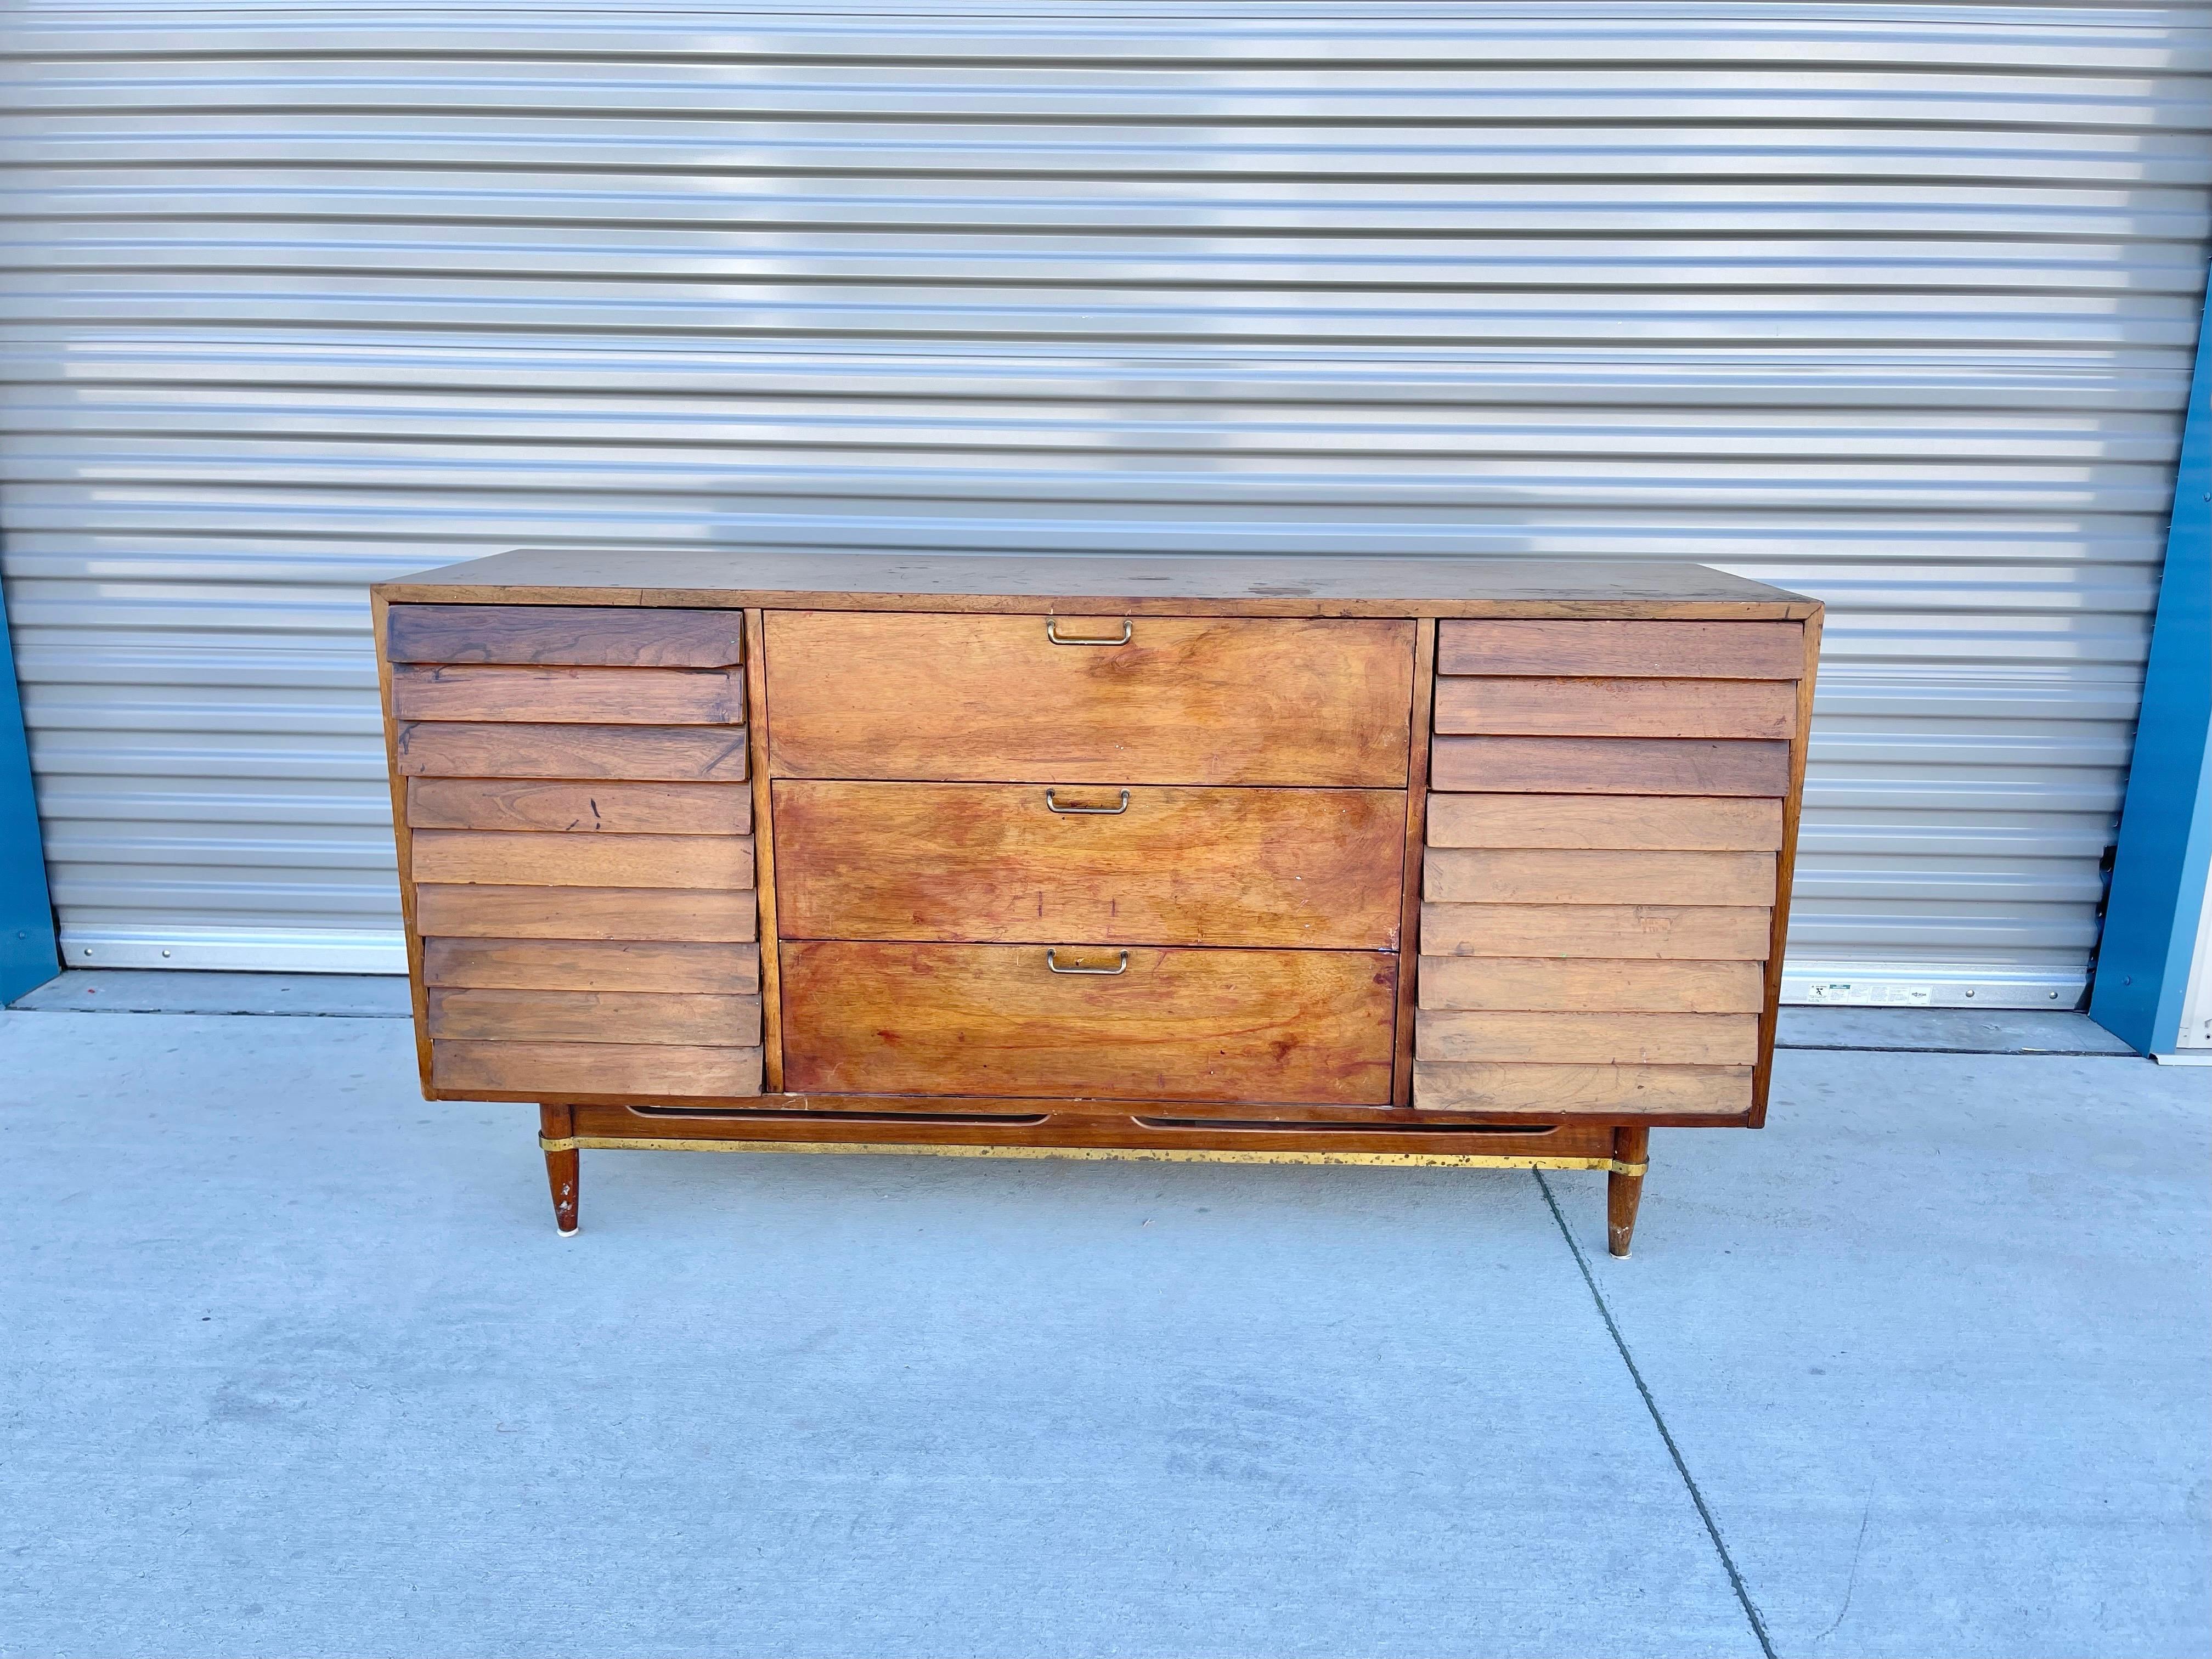 Mid-century walnut dresser designed and manufactured by American of Martinsville in the United States circa 1960s. This beautiful dresser features a walnut finish with nine pull-out drawers. The dresser also features a louvered front design giving